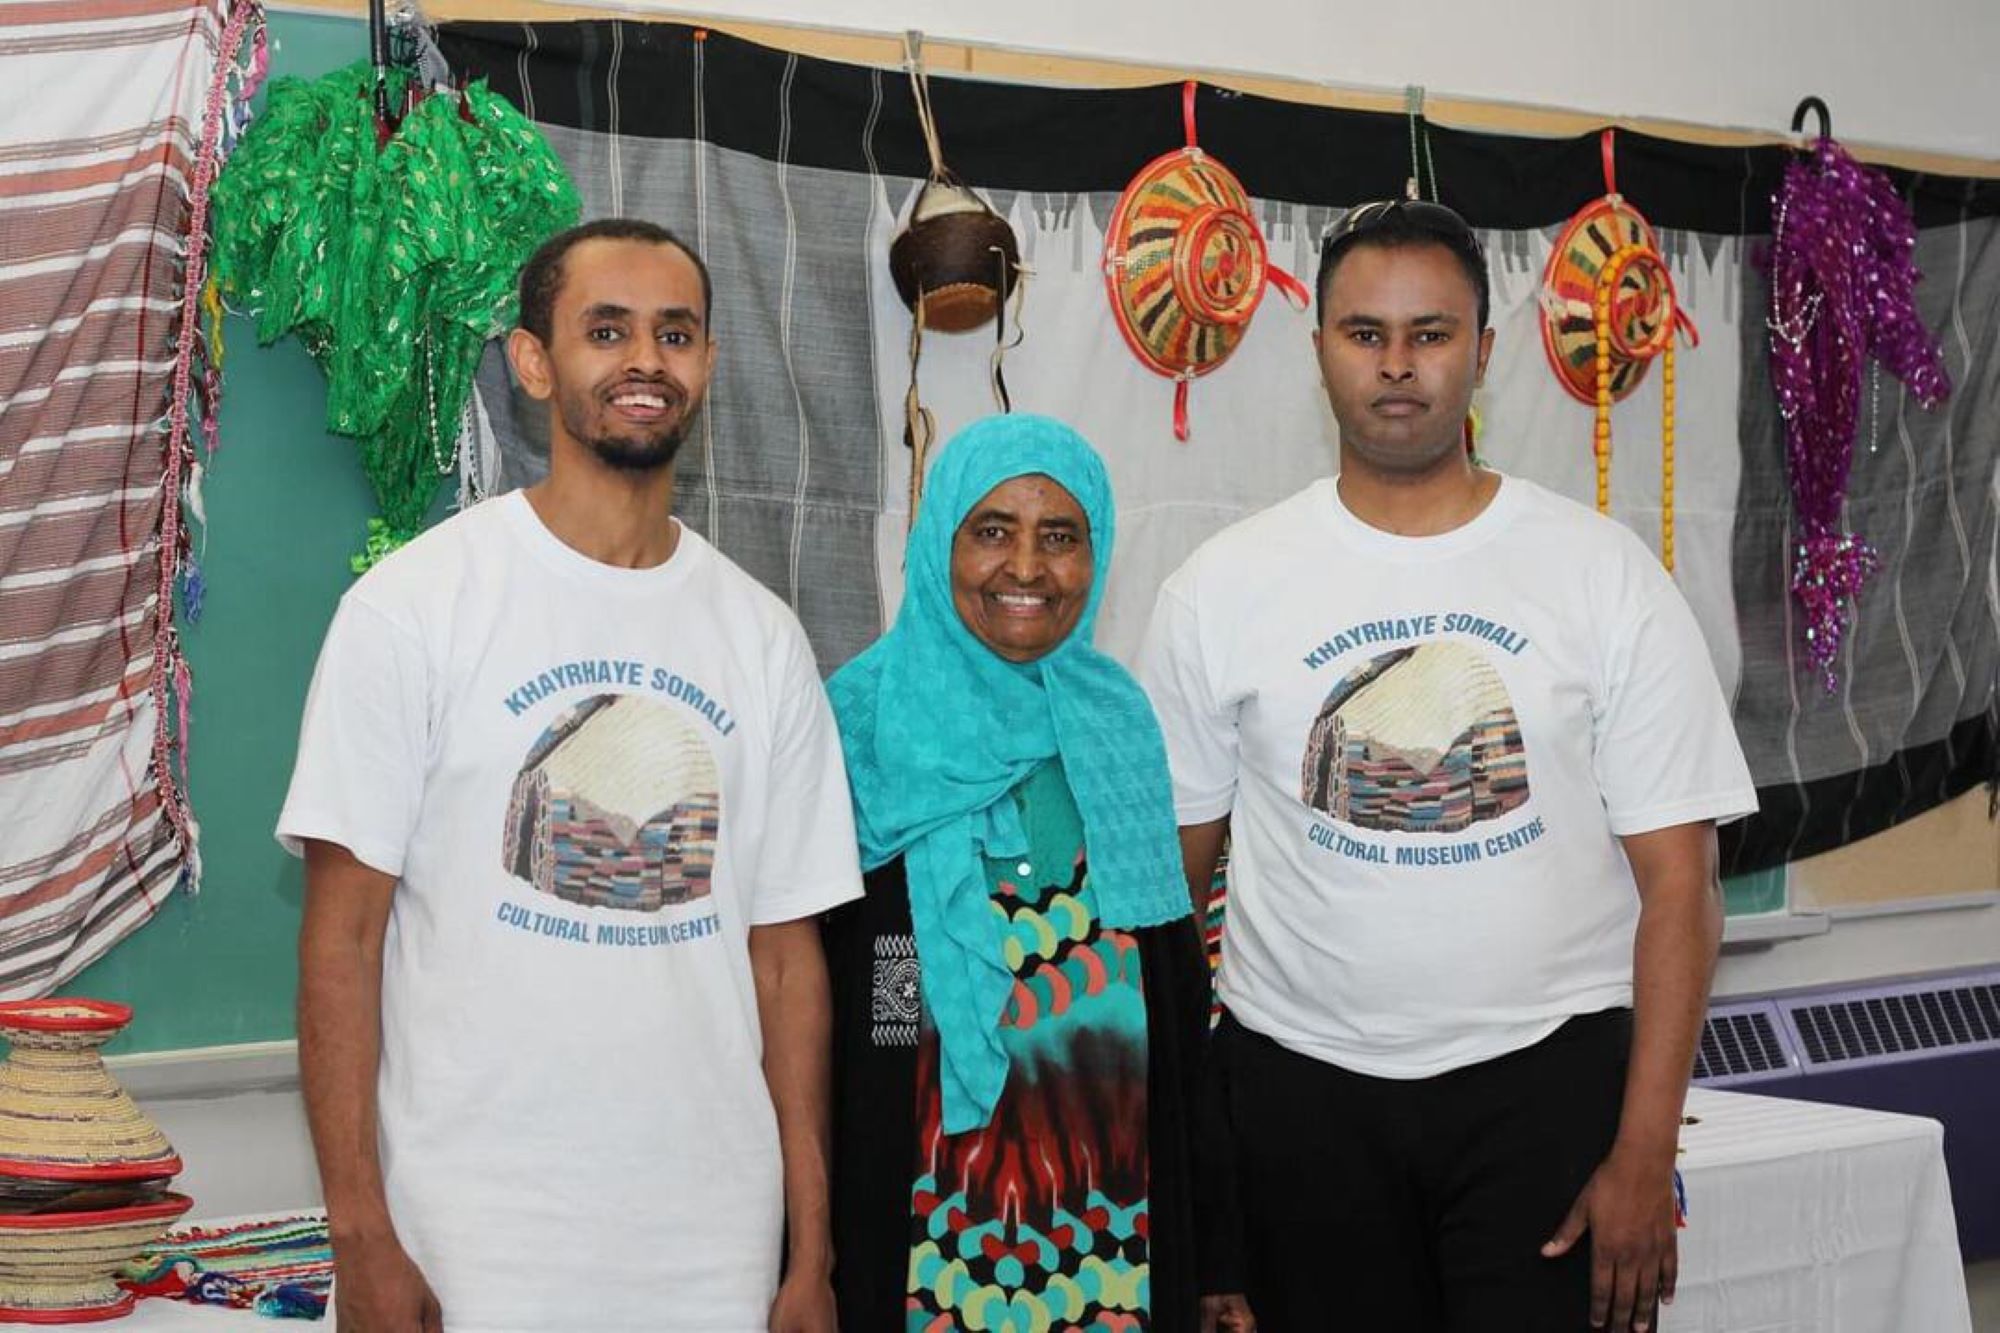 Kaltoun Moussa with two of her sons, Younis Osman (left) and Hersi Osman (right).